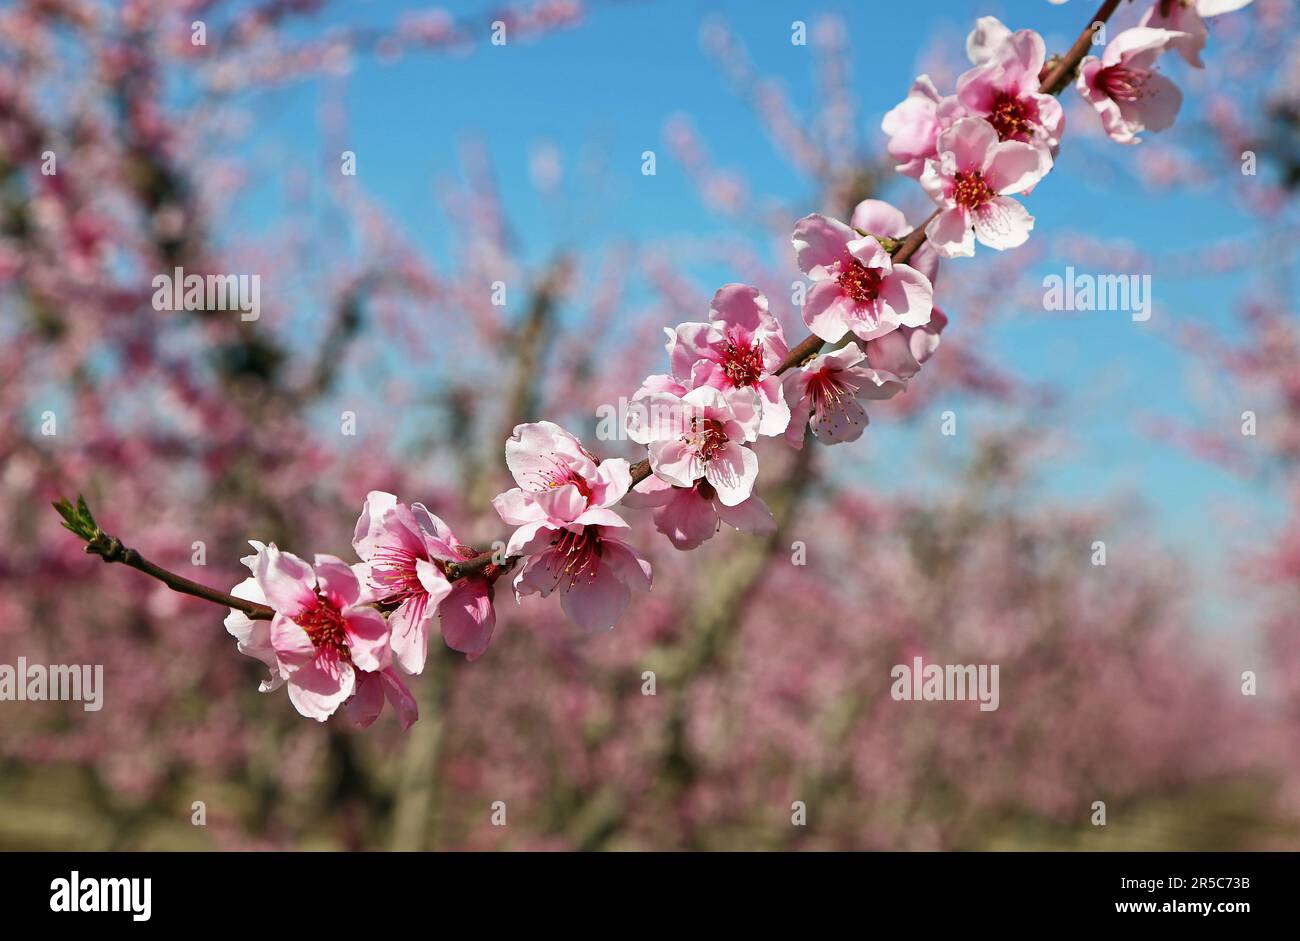 The branch with Peach blossom Stock Photo